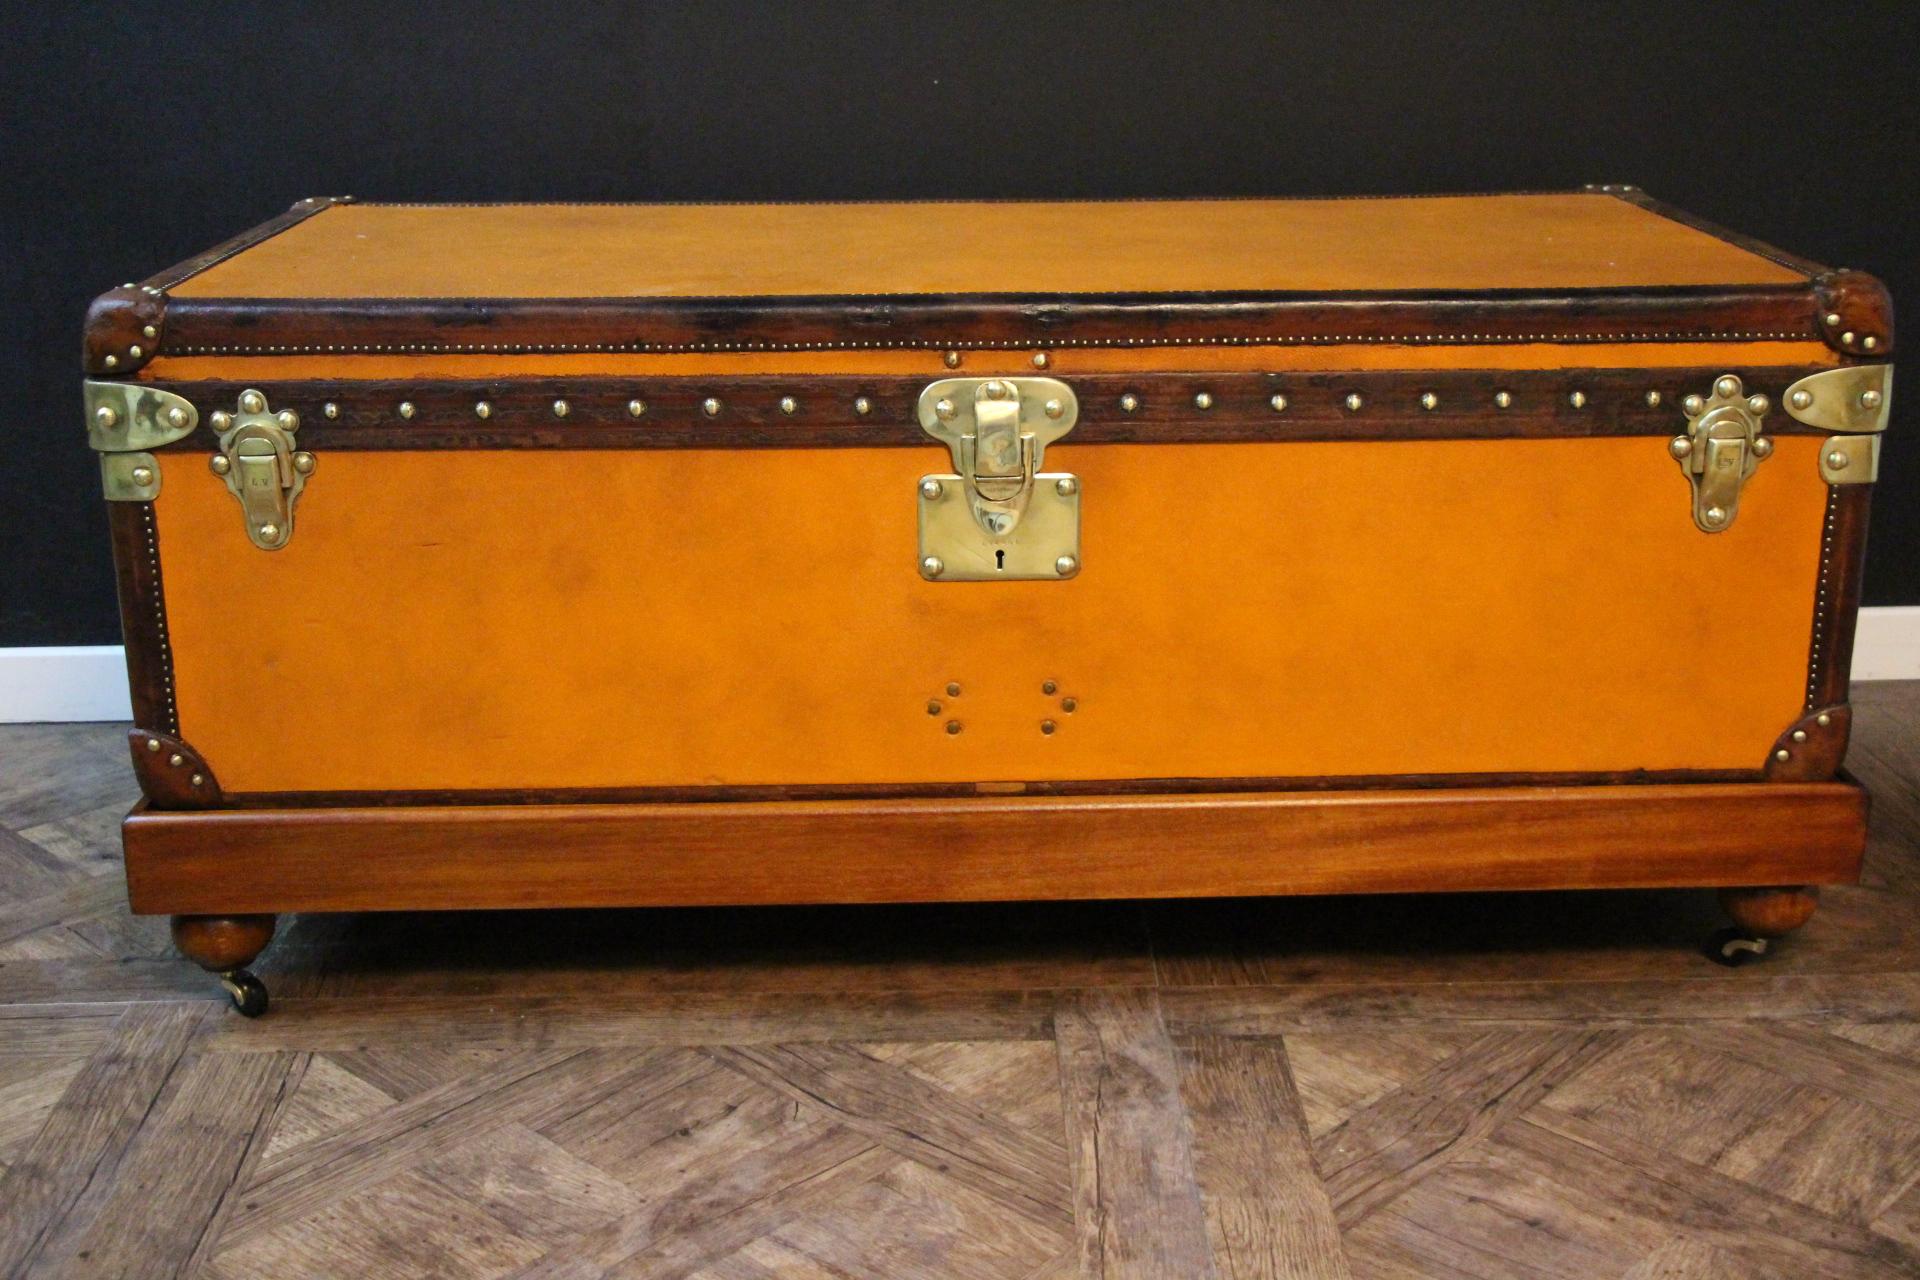 This very nice orange canvas Louis Vuitton steamer trunk, features Louis solid brass lock, Louis Vuitton stamped clasps as well as all its studs. Beautiful and rich chocolate color leather trim and handles. Unusual and elegant proportions.
It is